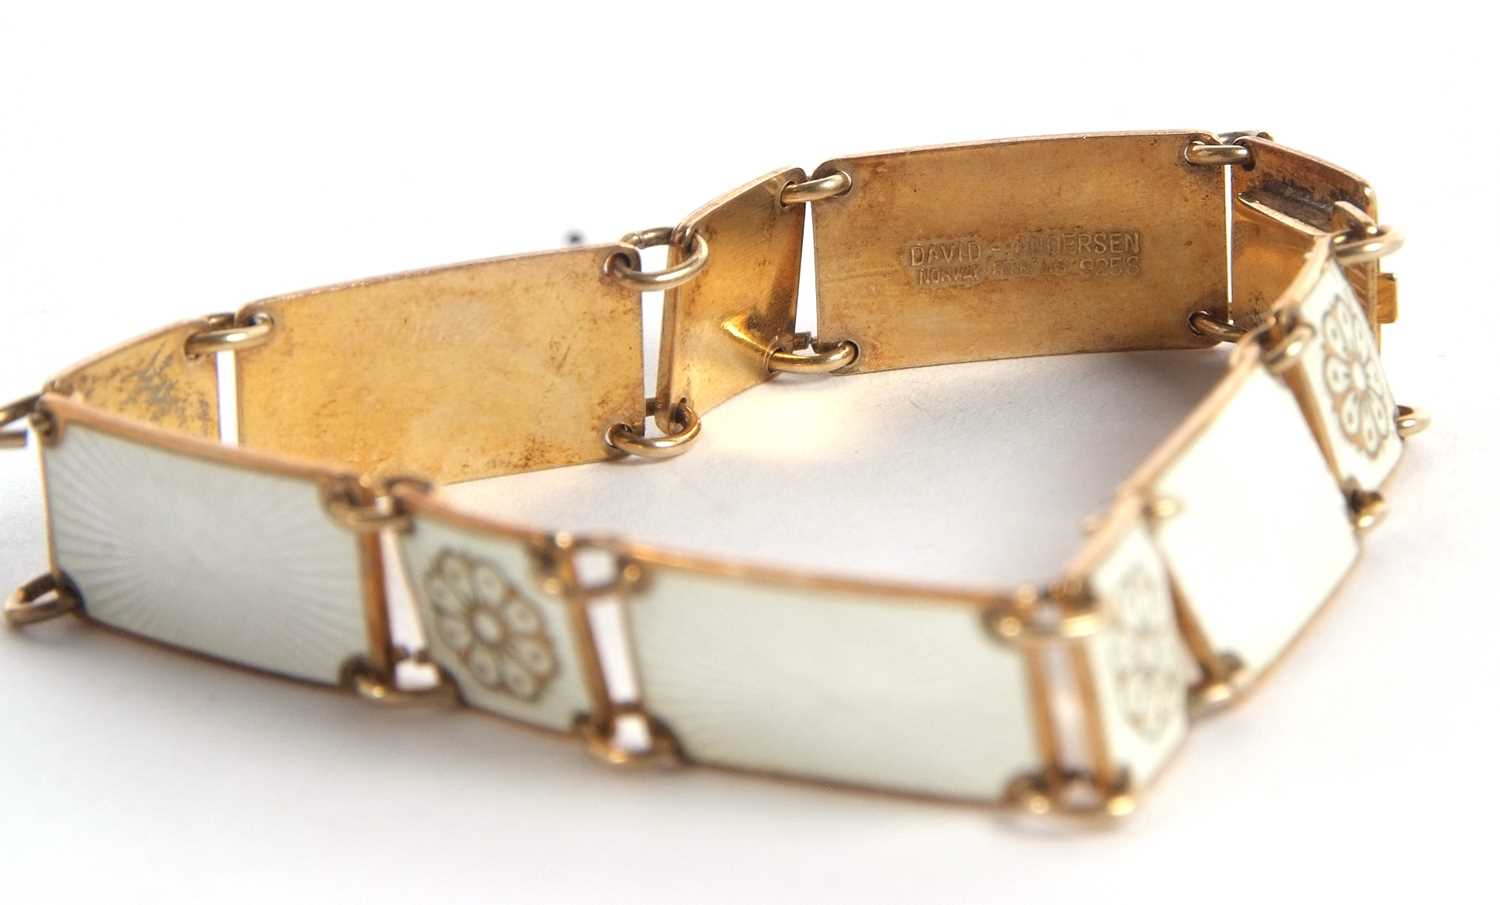 A silver gilt and enamel bracelet and matching earrings by David Anderson, Norway, the bracelet with - Image 2 of 5